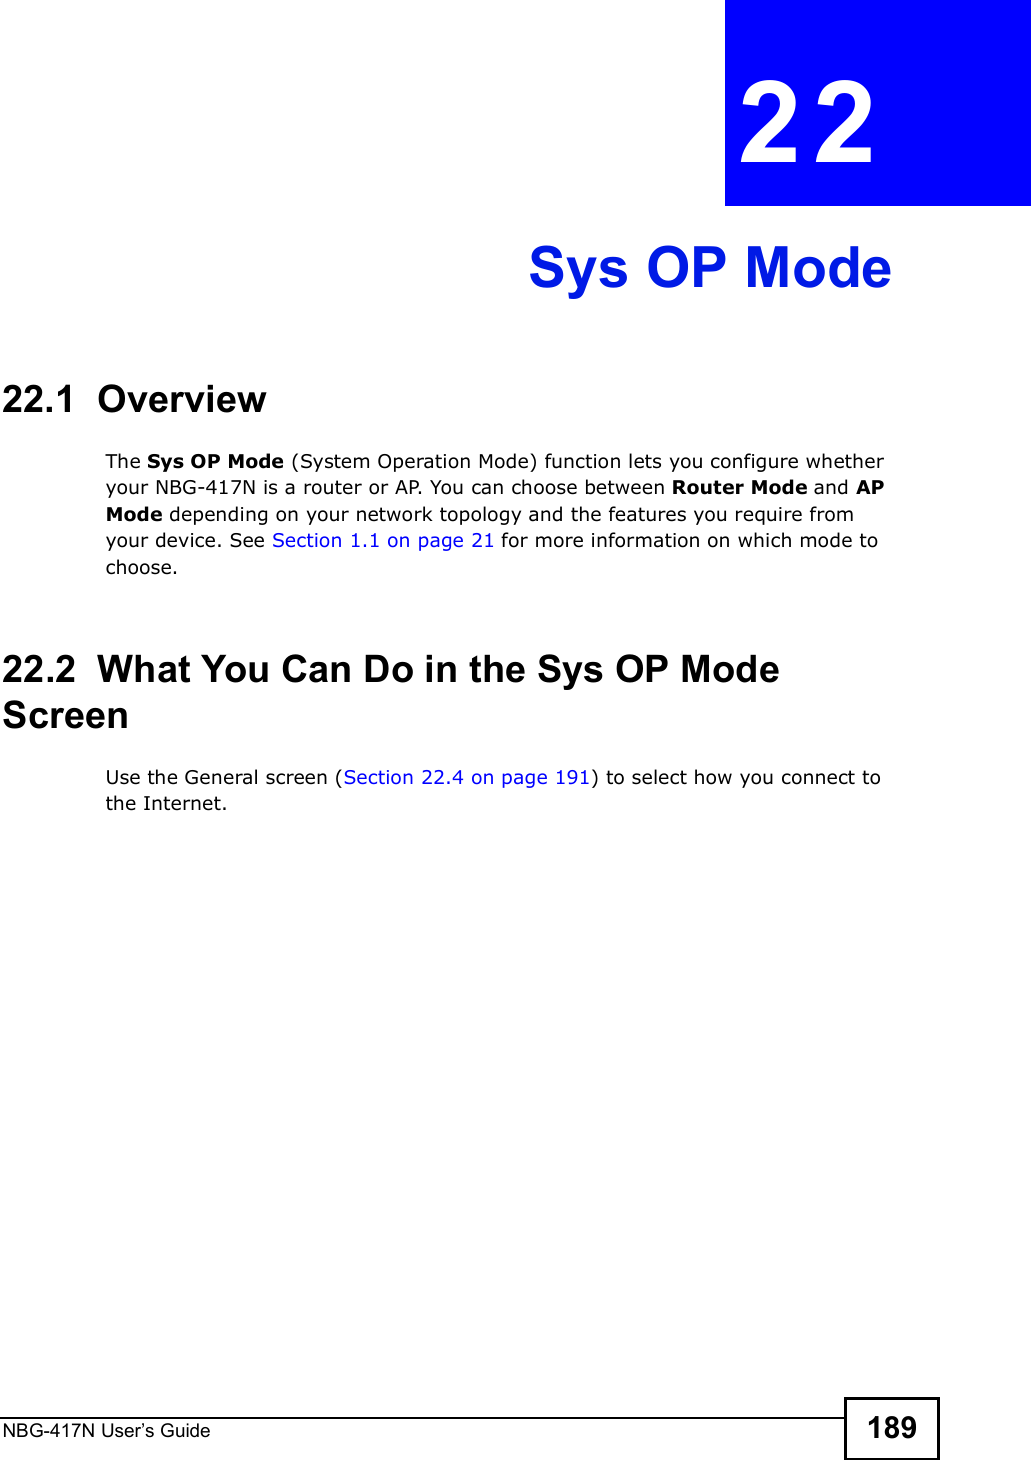 NBG-417N User s Guide 189CHAPTER  22 Sys OP Mode22.1  OverviewThe Sys OP Mode (System Operation Mode) function lets you configure whether your NBG-417N is a router or AP. You can choose between Router Mode and AP Mode depending on your network topology and the features you require from your device. See Section 1.1 on page 21 for more information on which mode to choose.22.2  What You Can Do in the Sys OP Mode ScreenUse the General screen (Section 22.4 on page 191) to select how you connect to the Internet. 